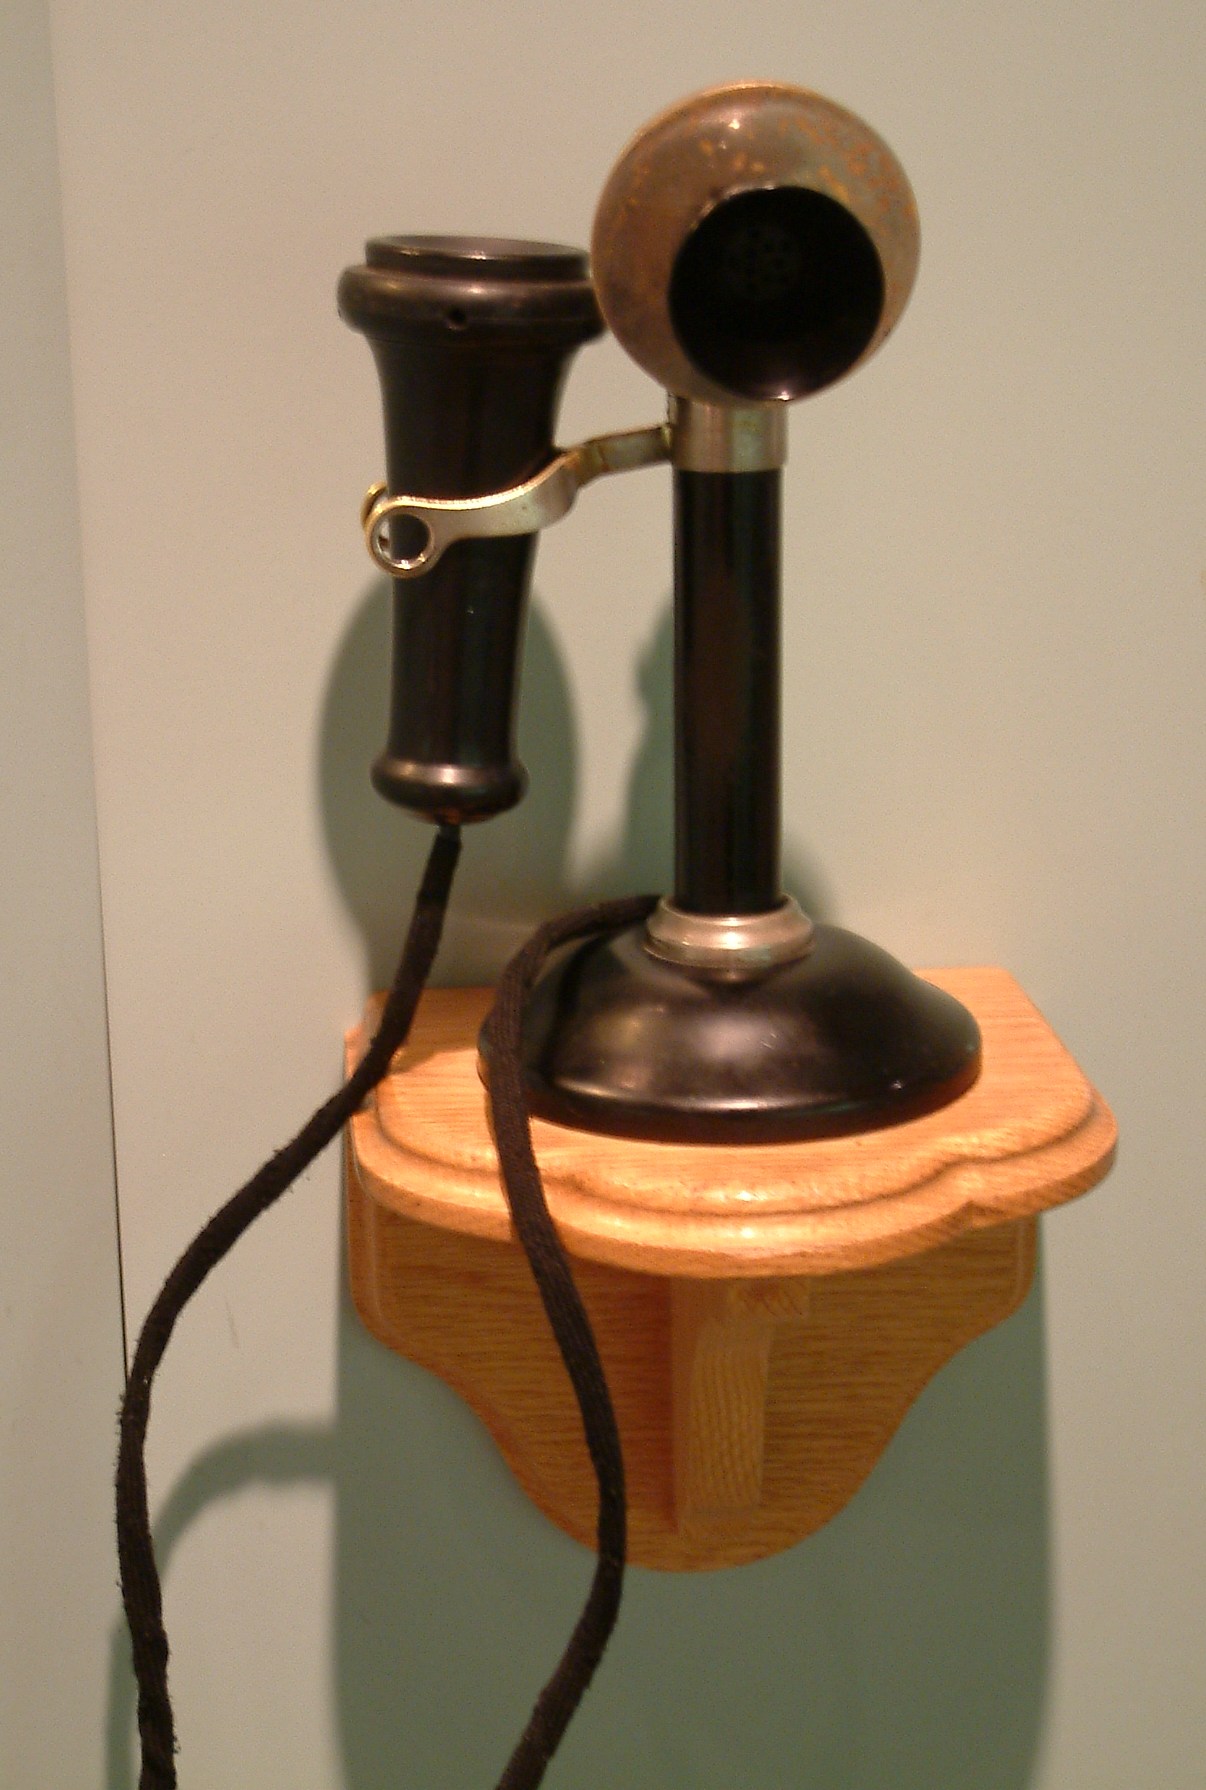 Old Fashioned Phone at the Illinois State Museum